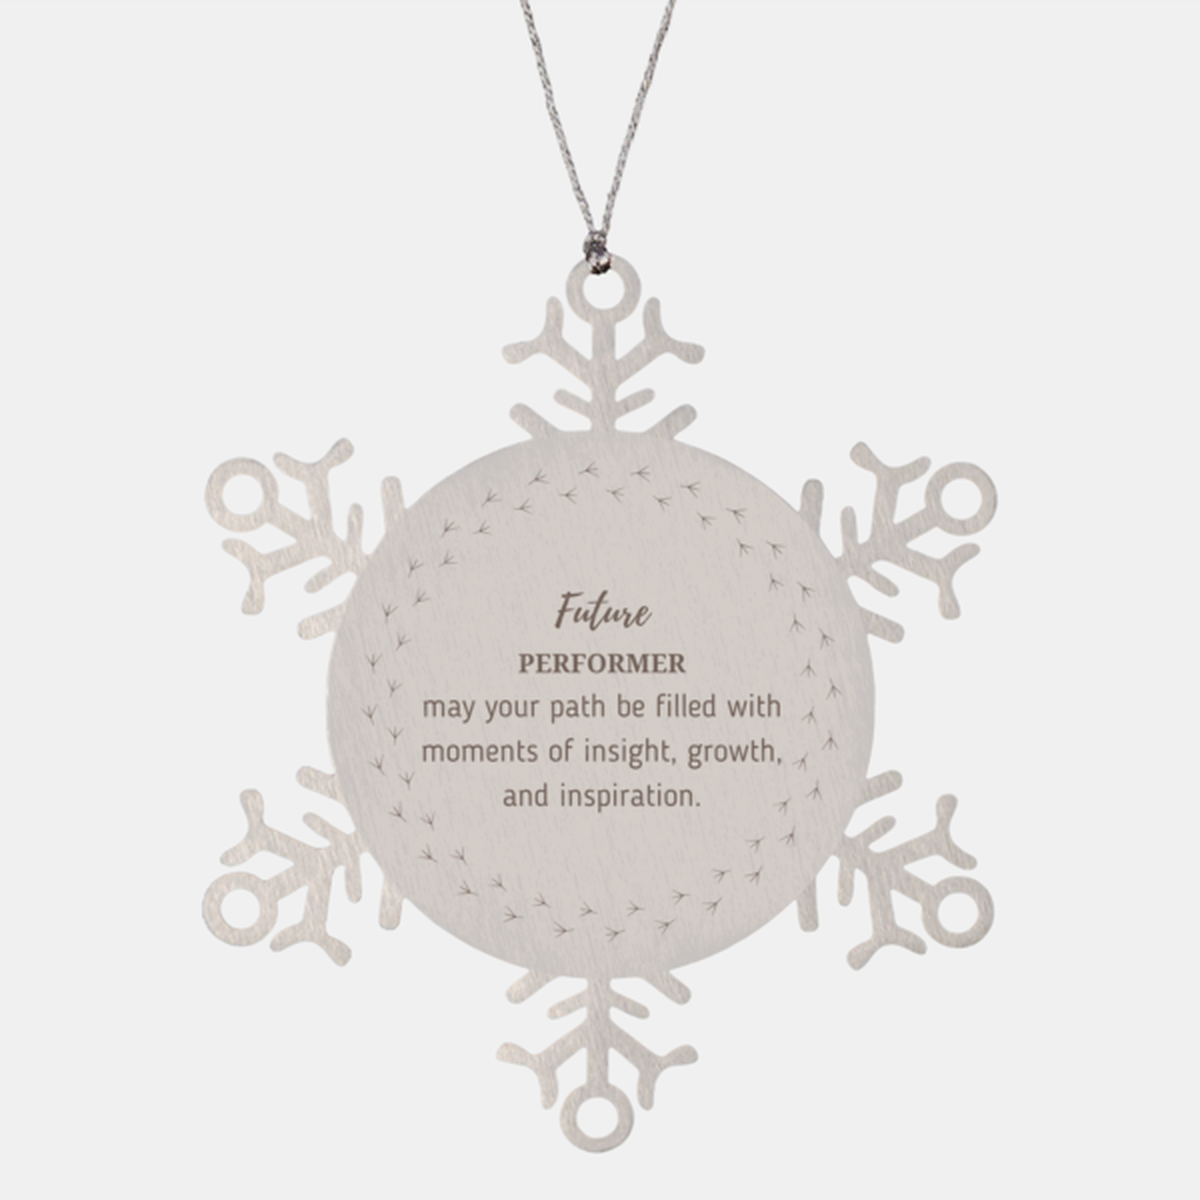 Future Performer Gifts, May your path be filled with moments of insight, Graduation Gifts for New Performer, Christmas Unique Snowflake Ornament For Men, Women, Friends